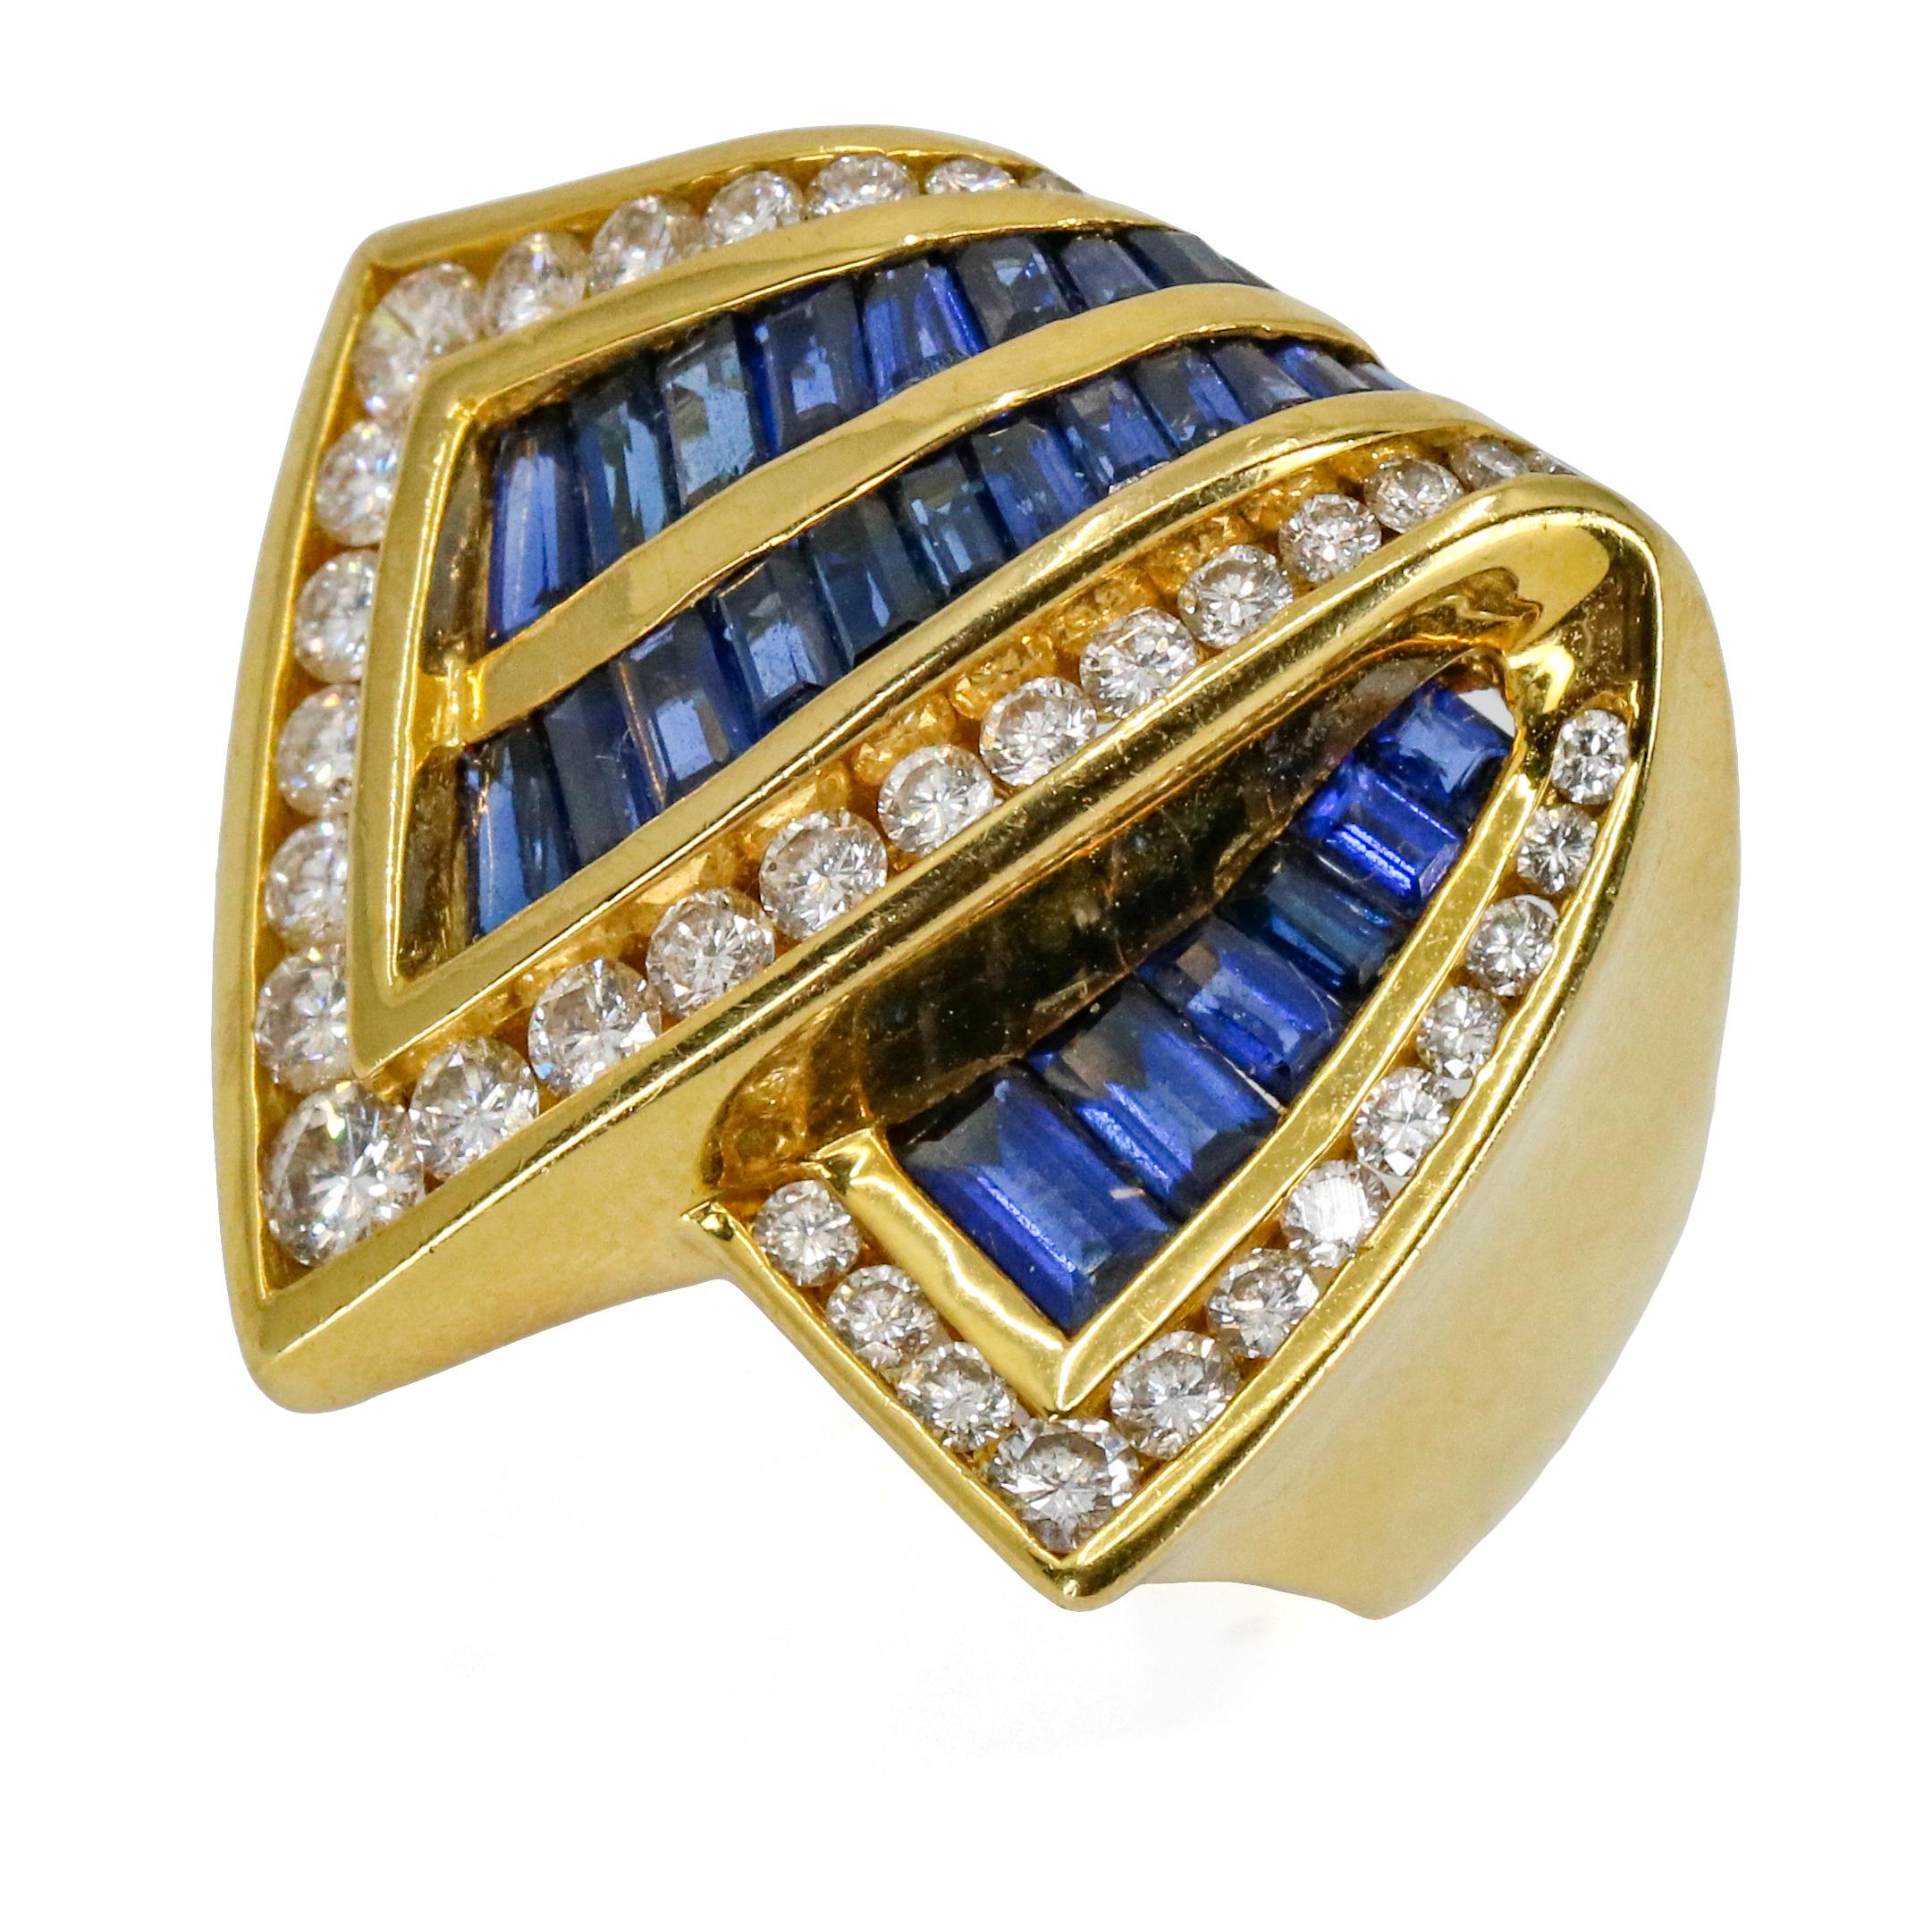 Charles Krypell 18 Karat Yellow Gold Sapphire Diamond Ring In Excellent Condition For Sale In Fort Lauderdale, FL